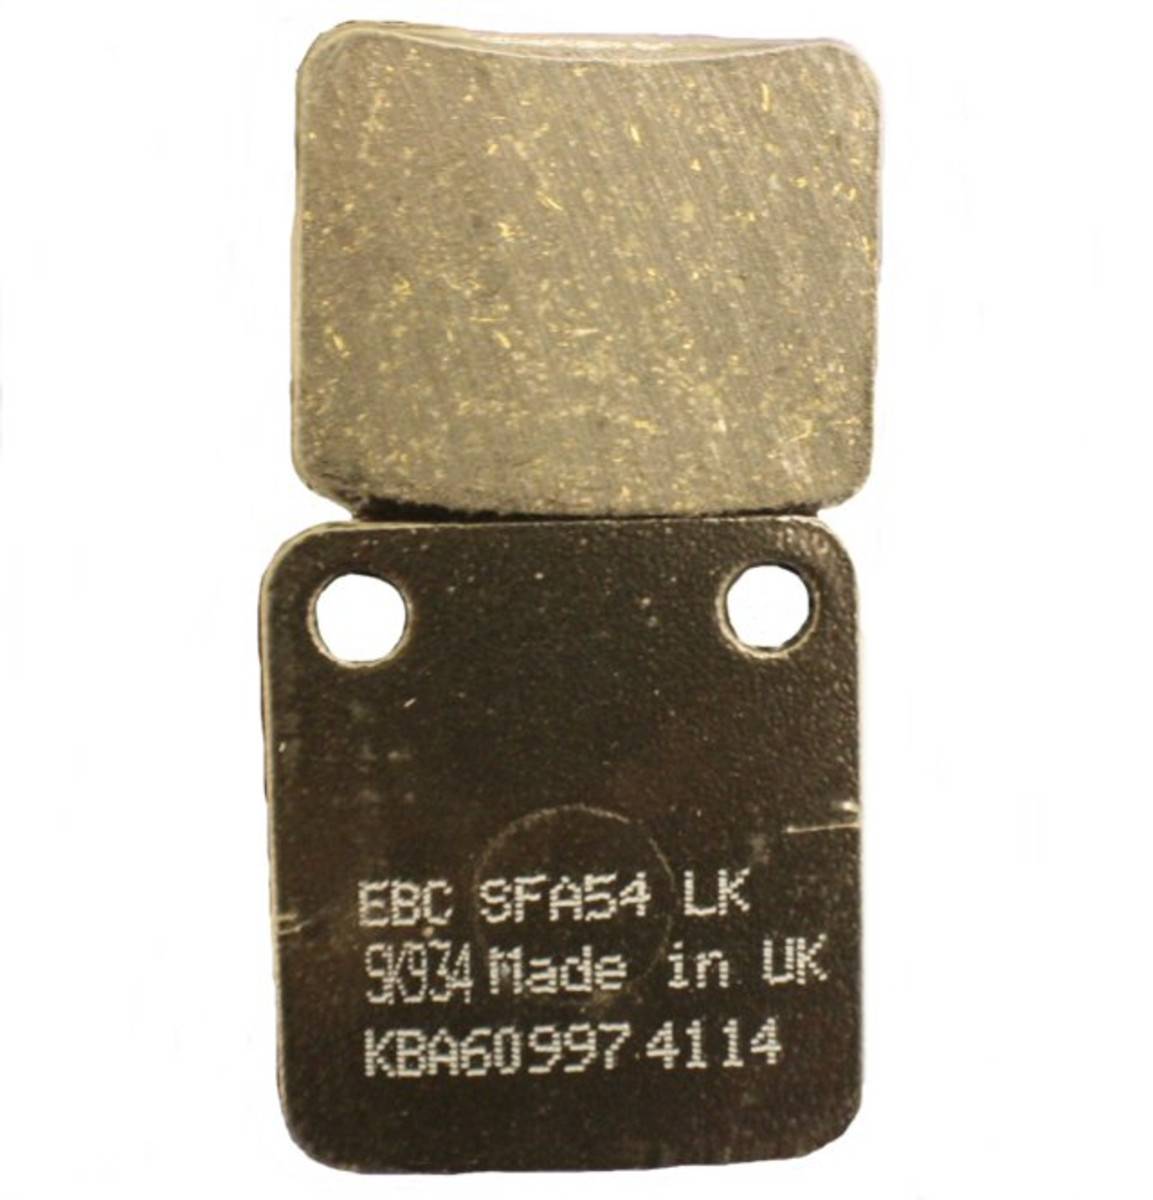 EBC Brakes SFA54 Scooter Brake Pads – REAR BRAKE PADS FOR TRAILMASTER / HAMMERHEAD AND MANY OTHER BUGGIES, ATVS, SCOOTERS AND DIRT BIKES